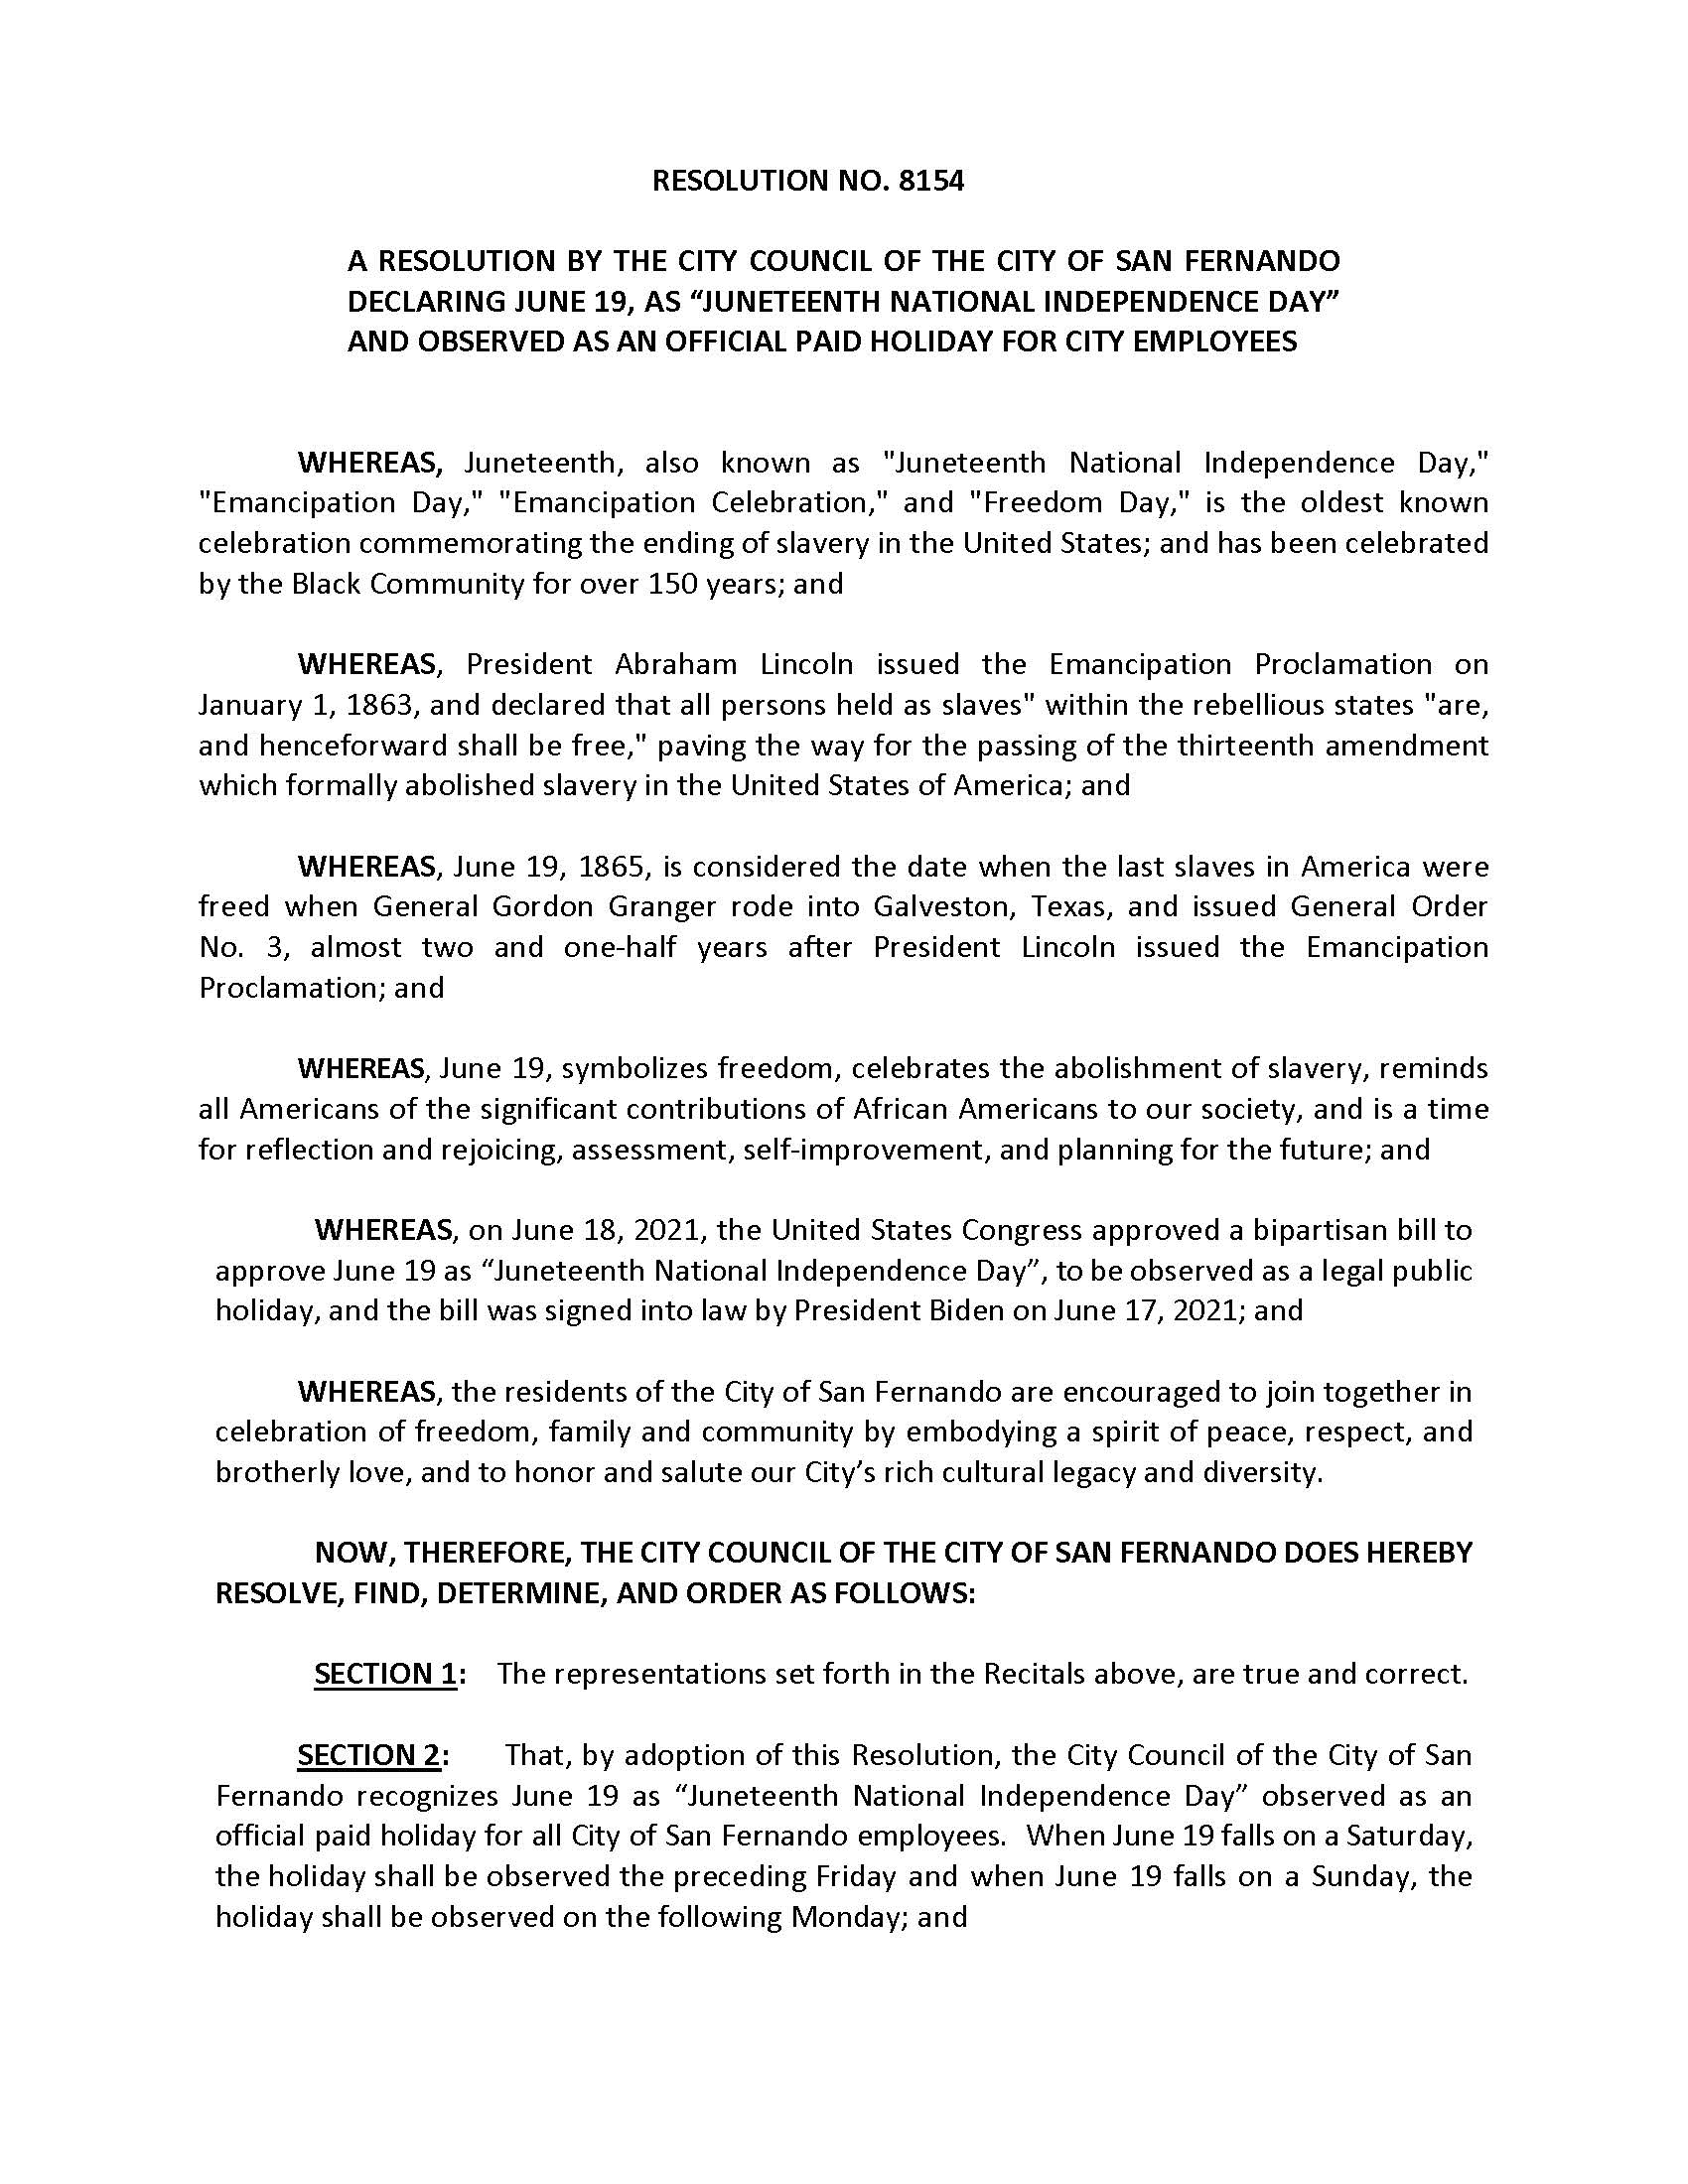 CC Reso No 8154 - Declaring June 19 as Juneteenth and Observed as Official Paid Holiday for City Employees (6-6-2022)_Page_1